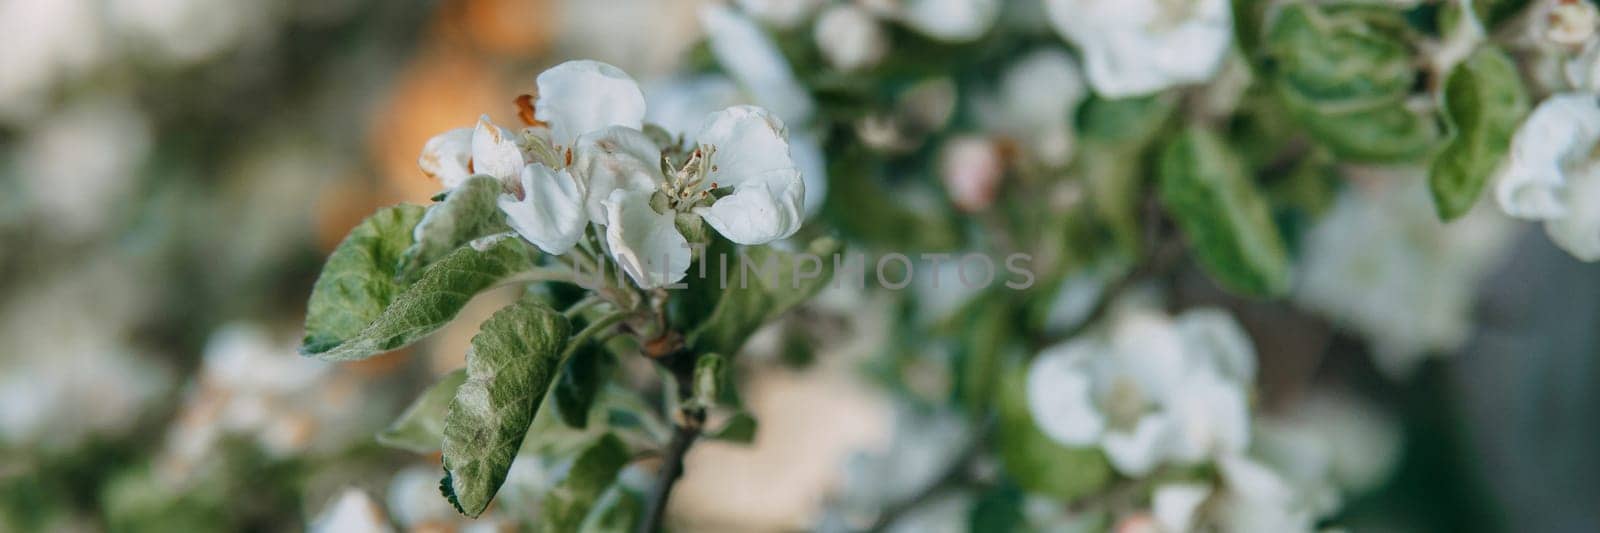 Blooming Apple tree branches with white flowers close-up. by Annu1tochka